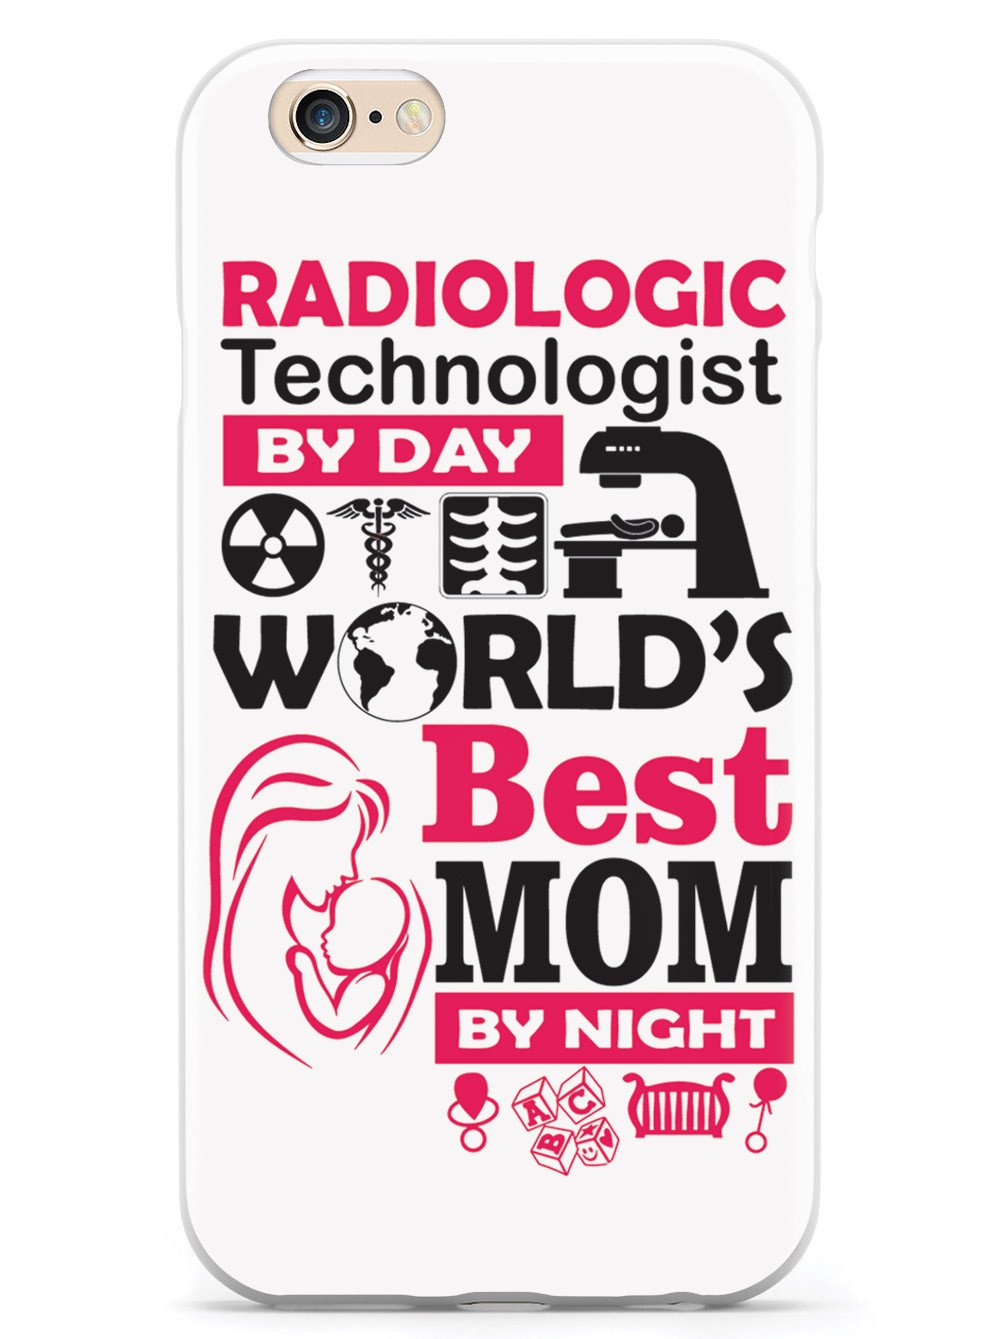 Radiologic Technologist By Day Mom By Night - White Case